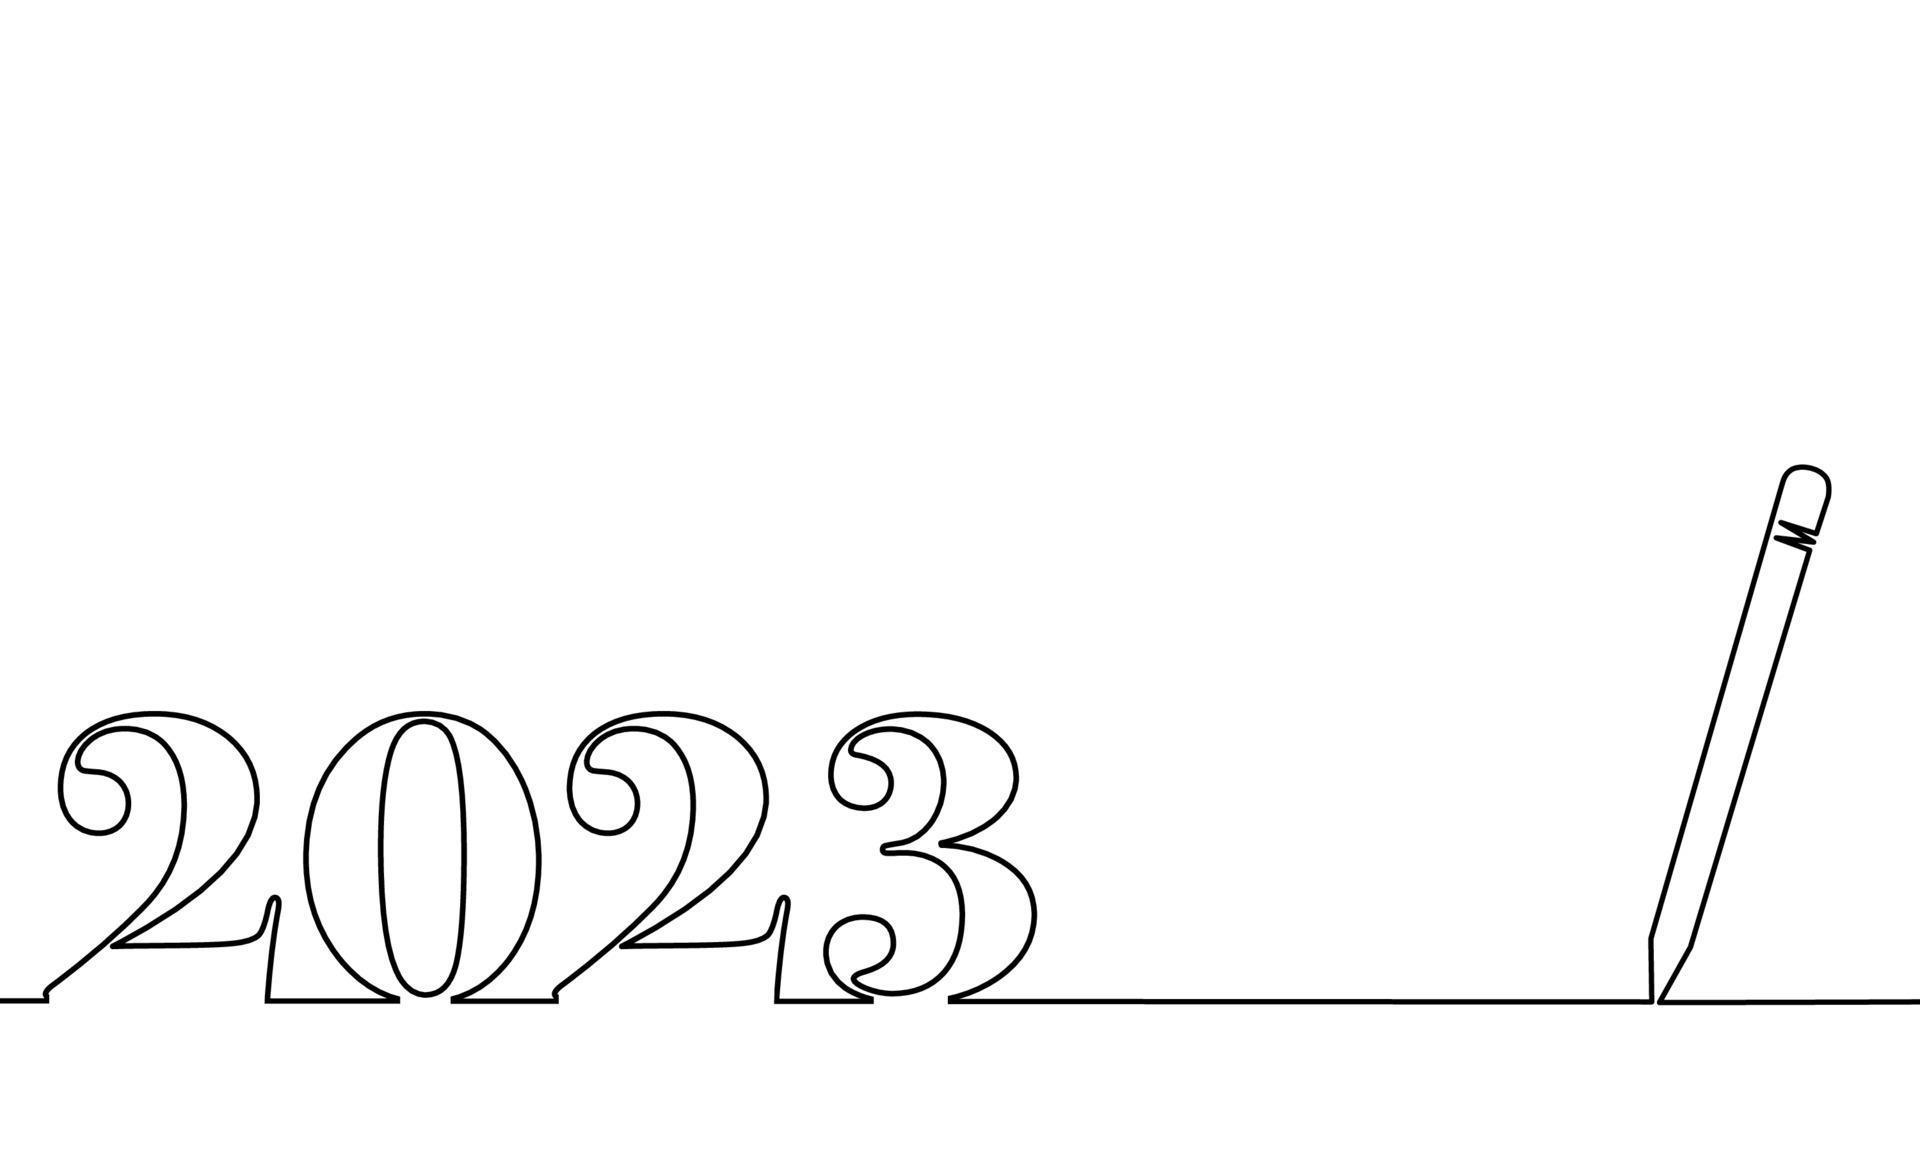 One Line Drawing Style With A Pen On The Right And 2023 On The Left The Year Of The Lord Concept About Writing Simply Yearly Celebrating Anniversary And Etc Free Vector 